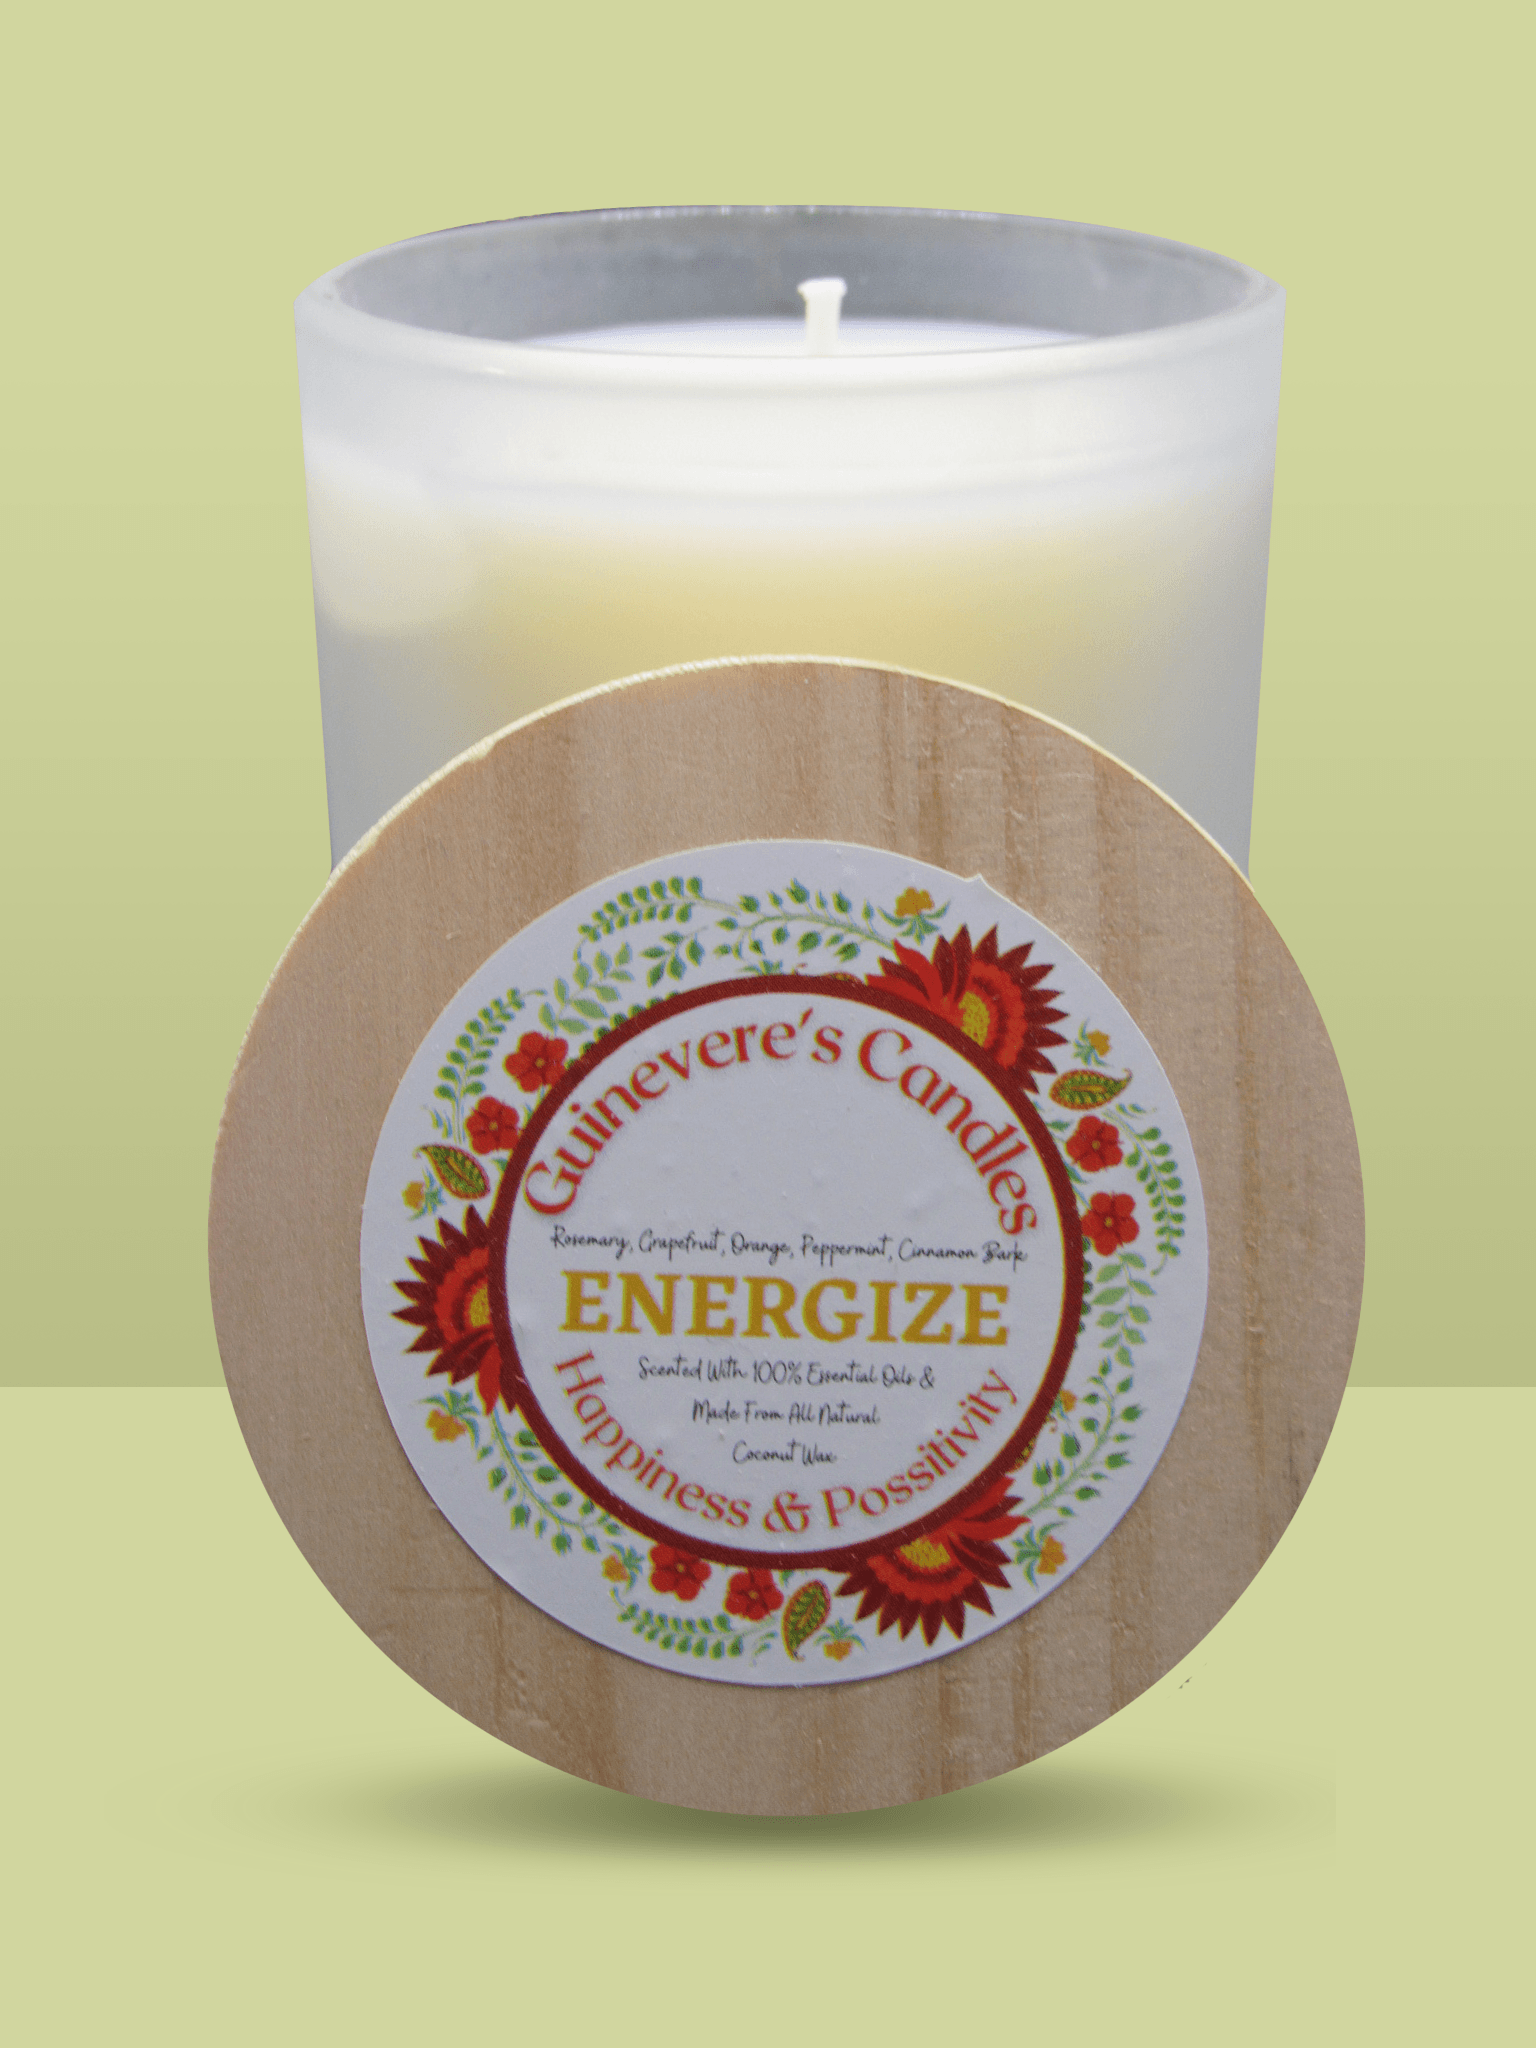 ENERGIZE--HAPPINESS & POSSITIVITY JAR CANDLE